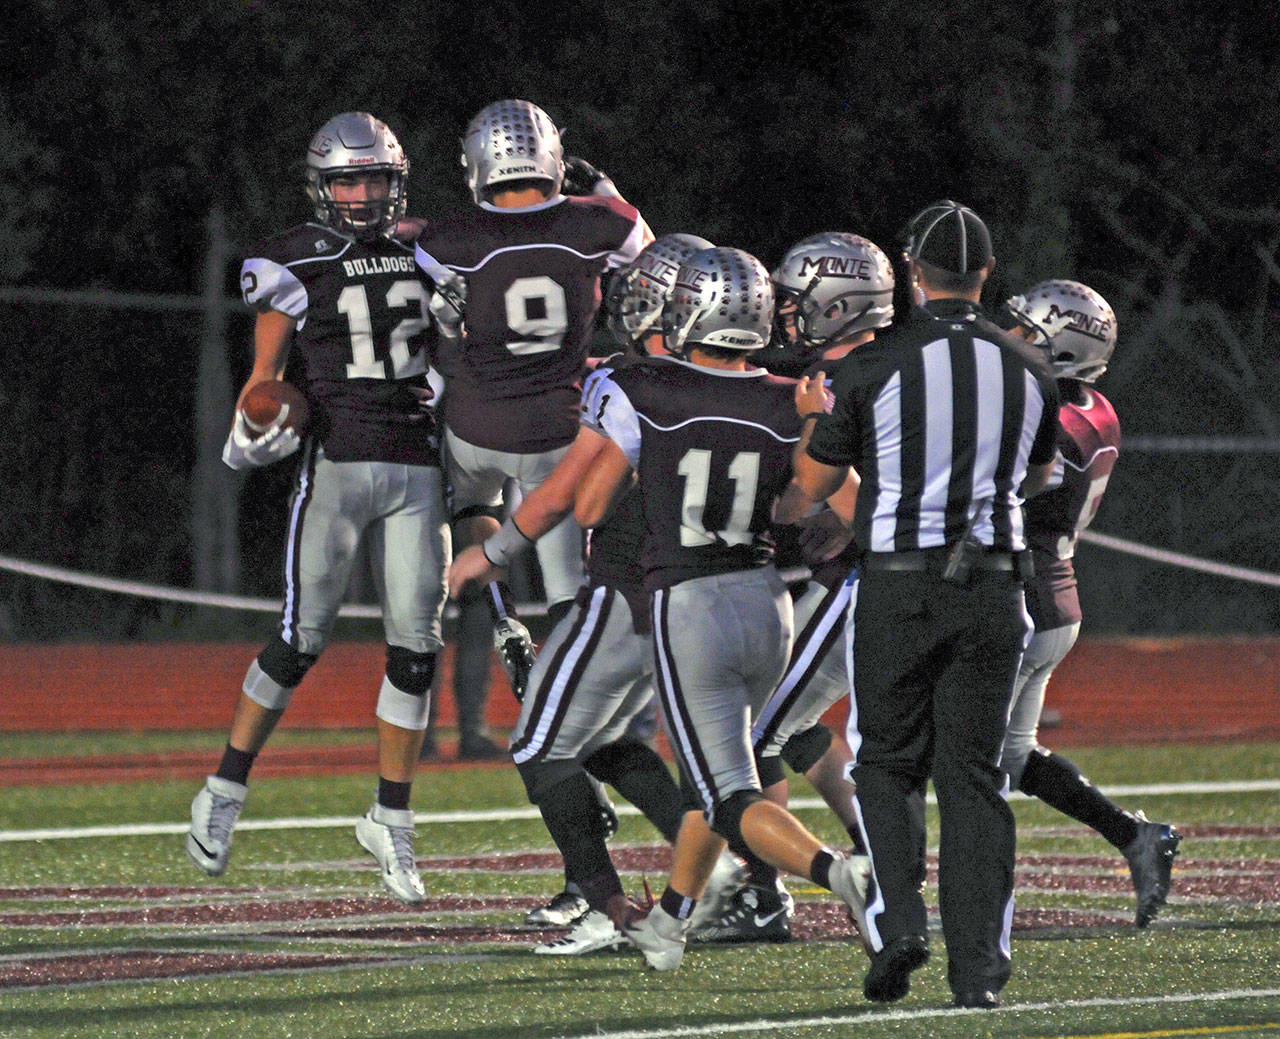 Montesano receiver Sam Winter (12) celebrates with his teammates after catching a 32-yard touchdown pass in the second quarter of the Bulldogs’ 51-6 victory over Shelton on Friday in Montesano. (Ryan Sparks | The Daily World)